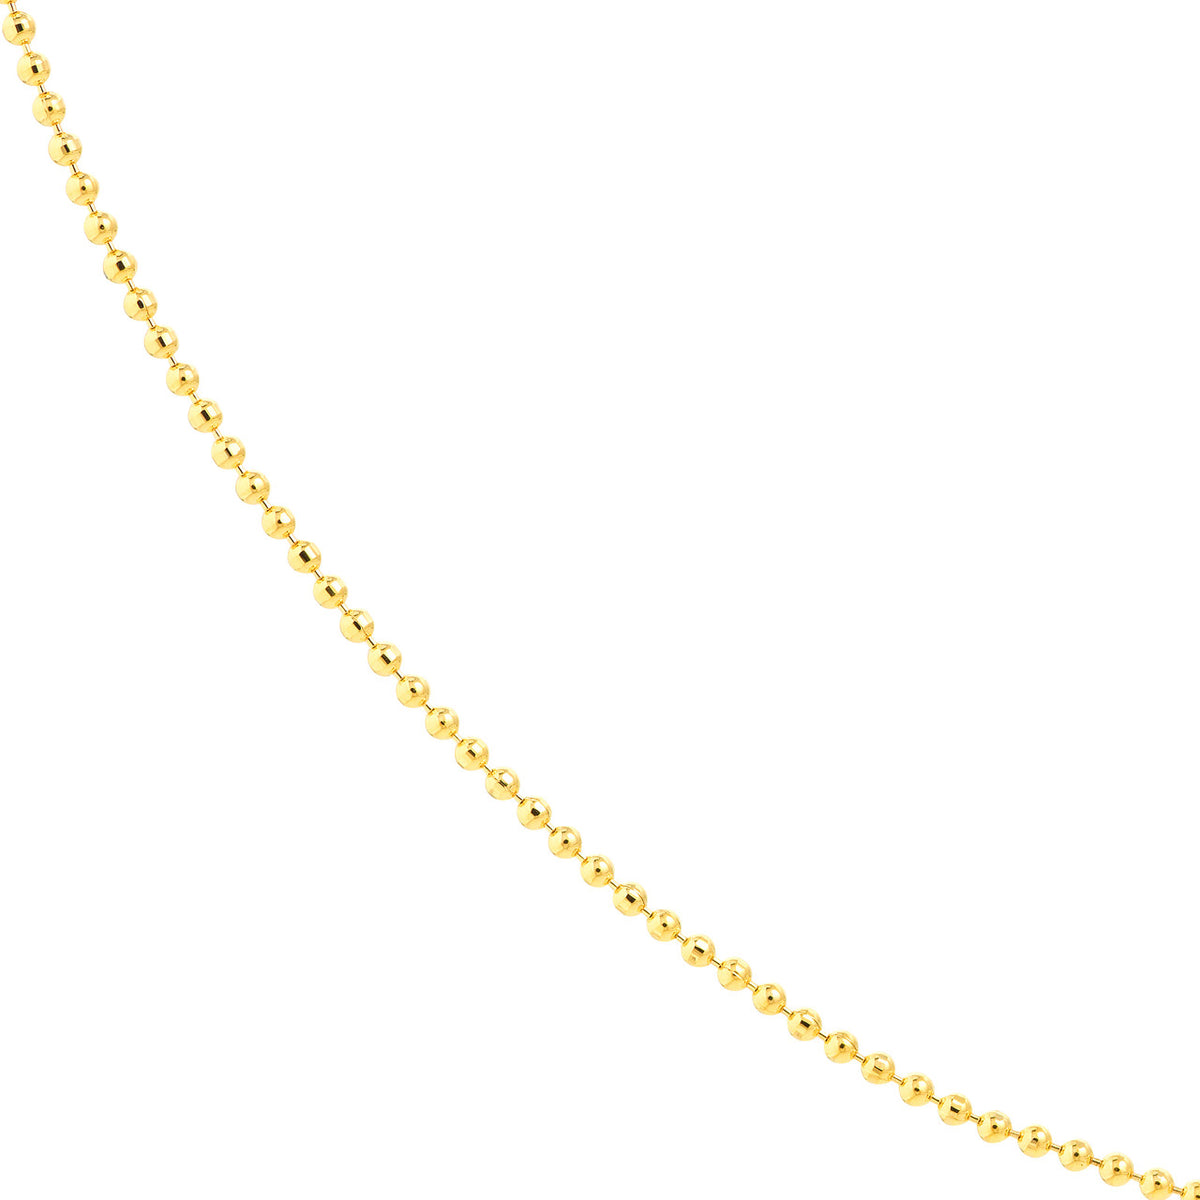 14K Yellow Gold and White Gold 0.78mm D/C Bead Chain Necklace with Spring Ring